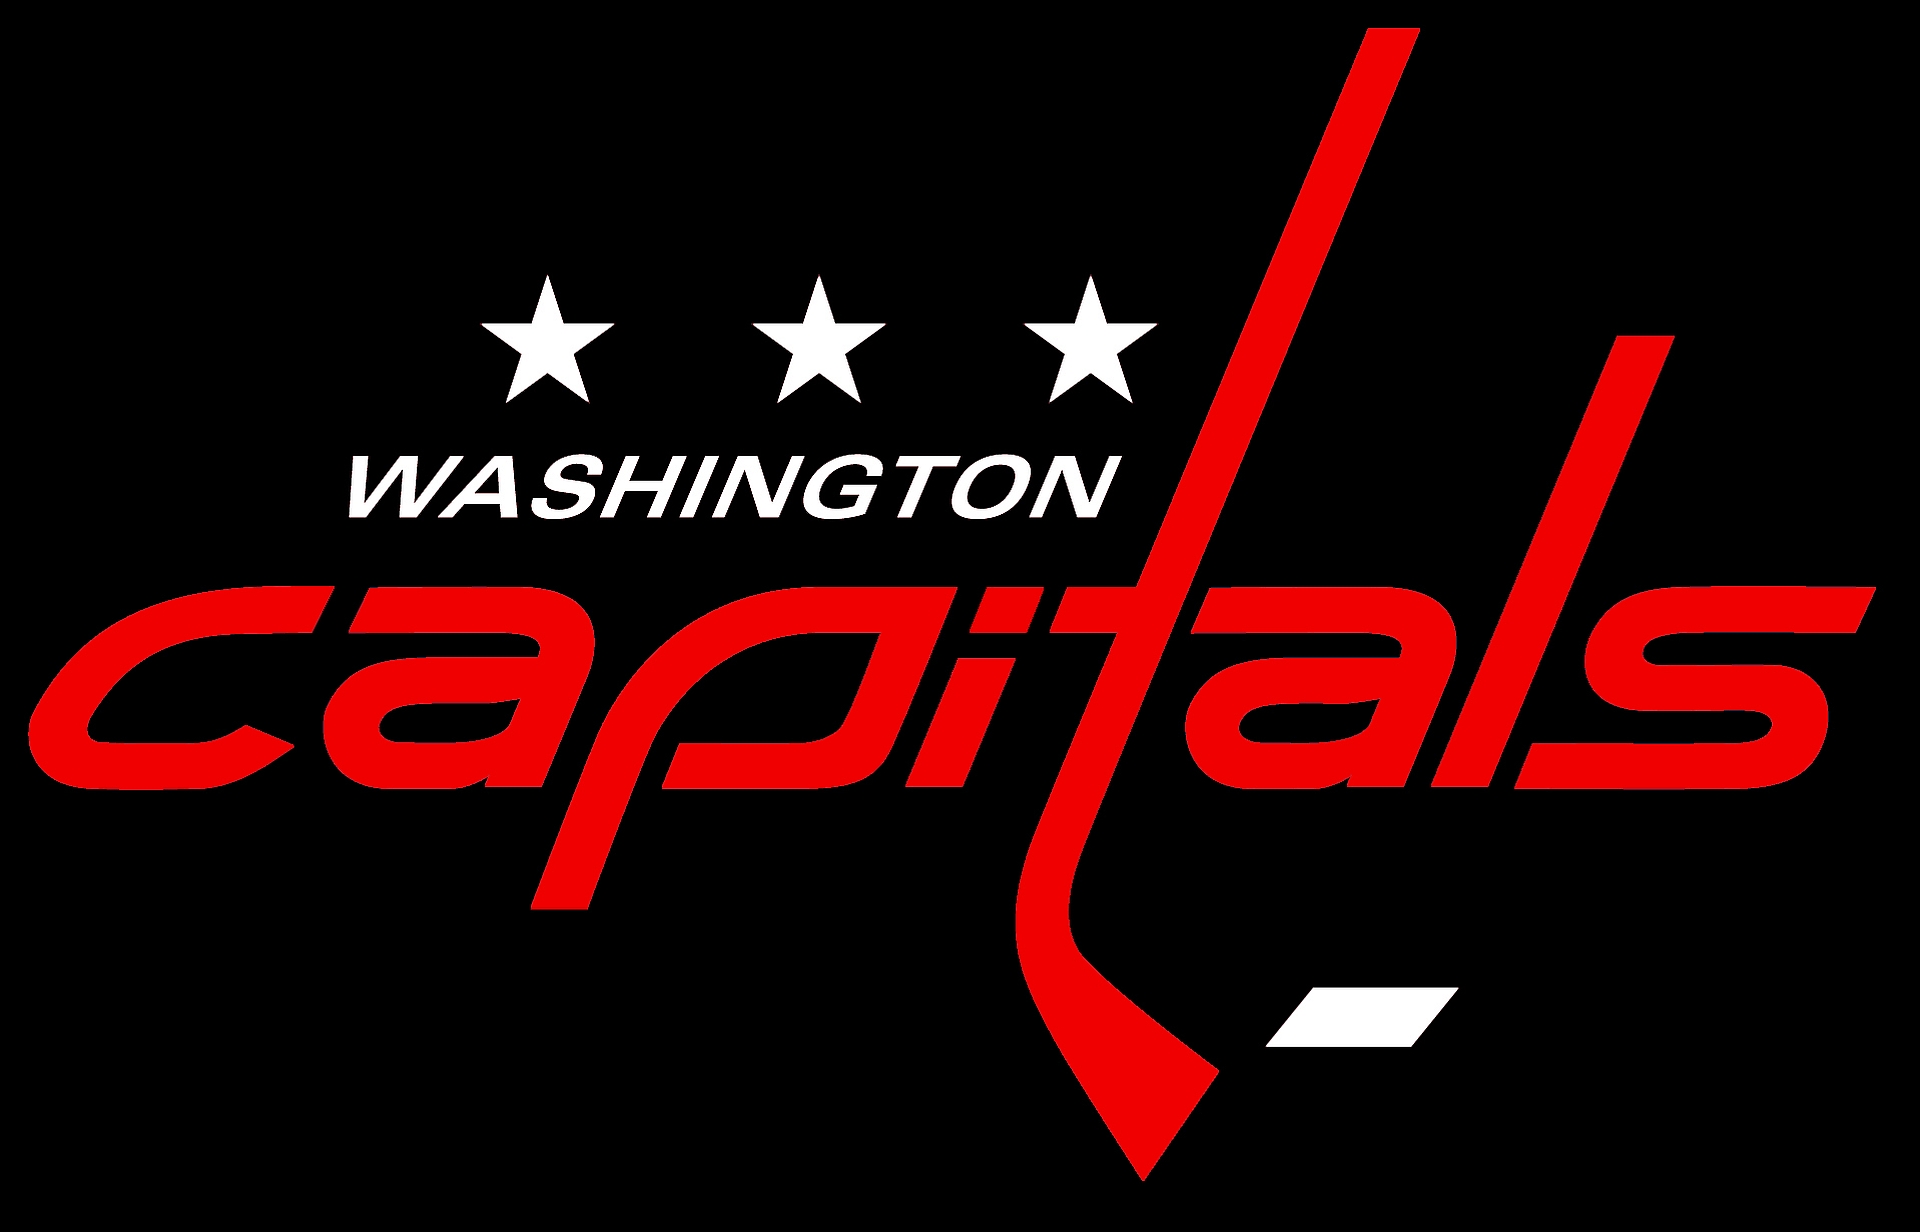 5 Washington Capitals HD Wallpapers | Backgrounds - Wallpaper Abyss